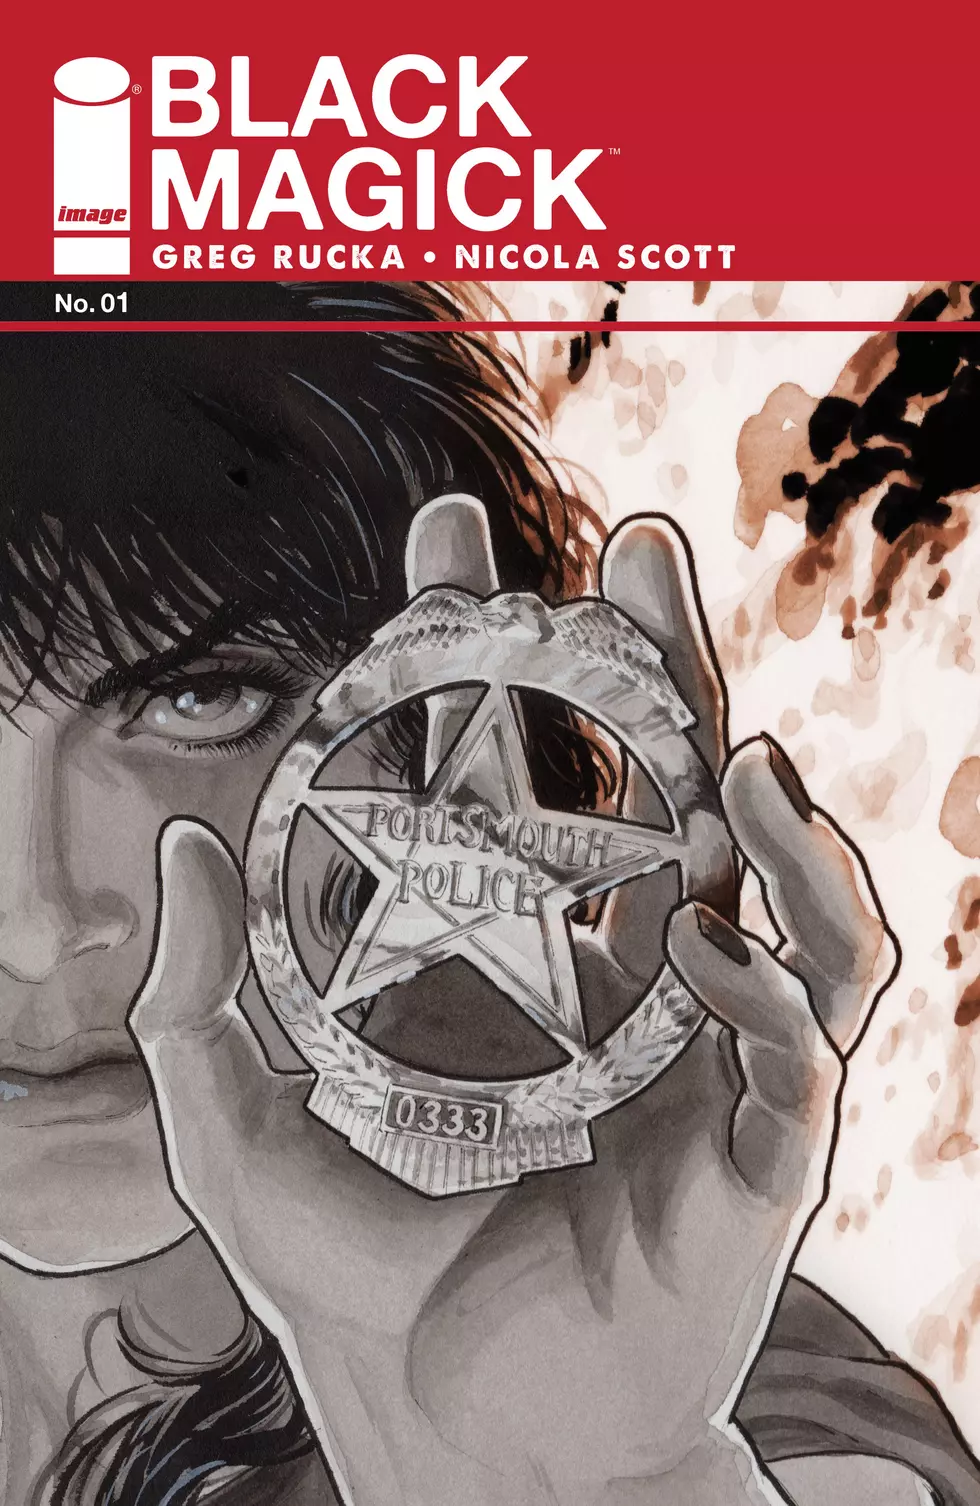 Greg Rucka And Nicola Scott&#8217;s &#8216;Black Magick&#8217; To Be Adapted For Television [SDCC 2016]